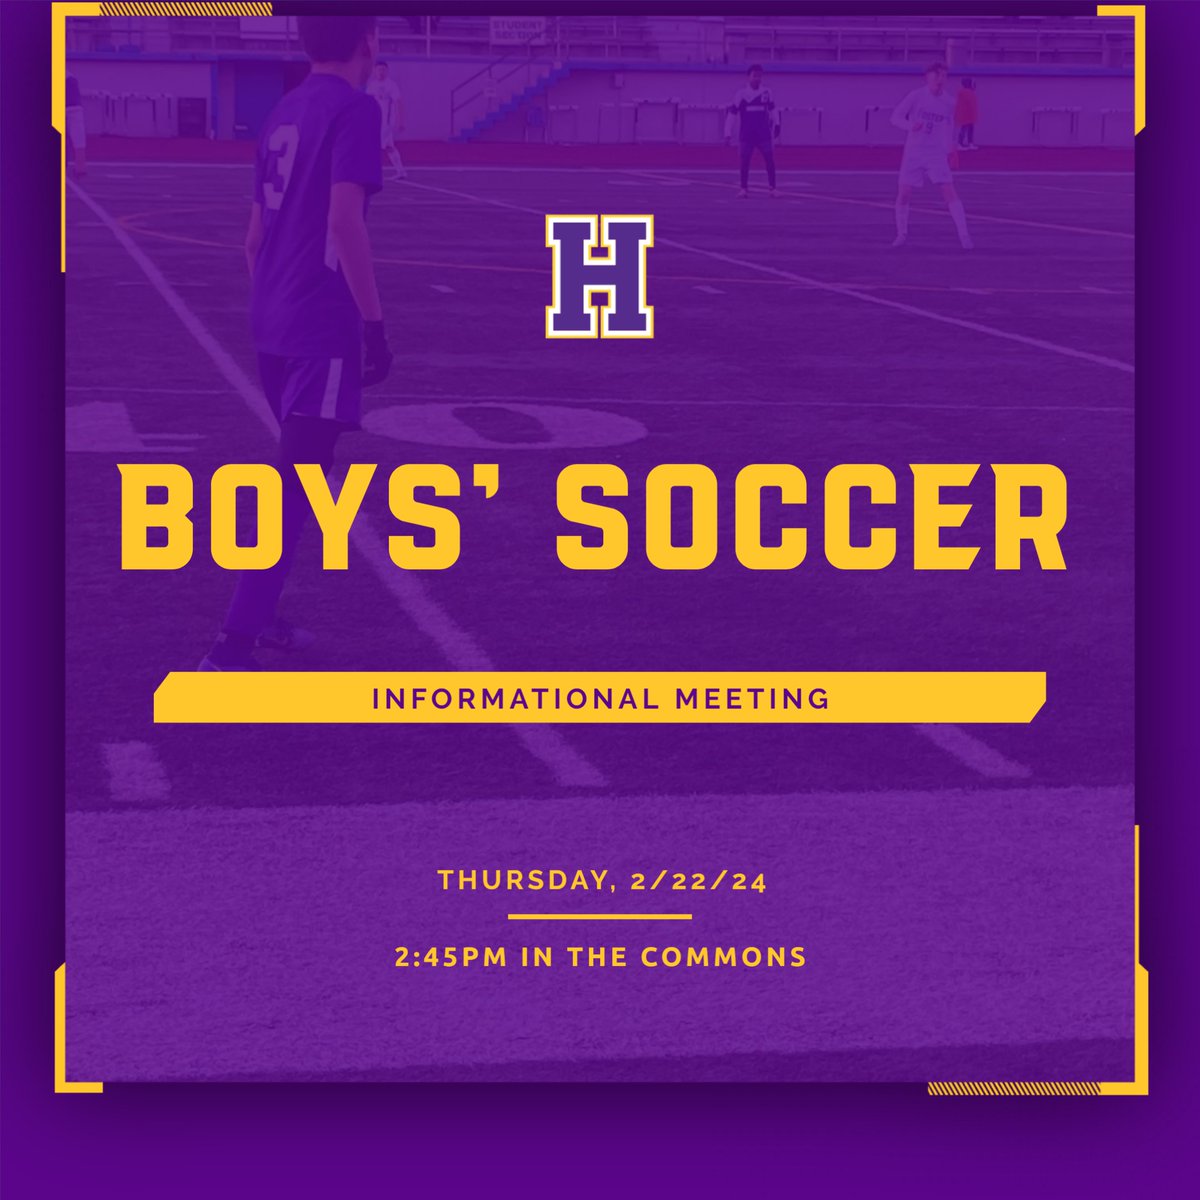 Interested in playing boys' soccer this spring? Come meet the coaches on Thursday after school and find out what you need to do for tryouts starting Monday, 2/26.